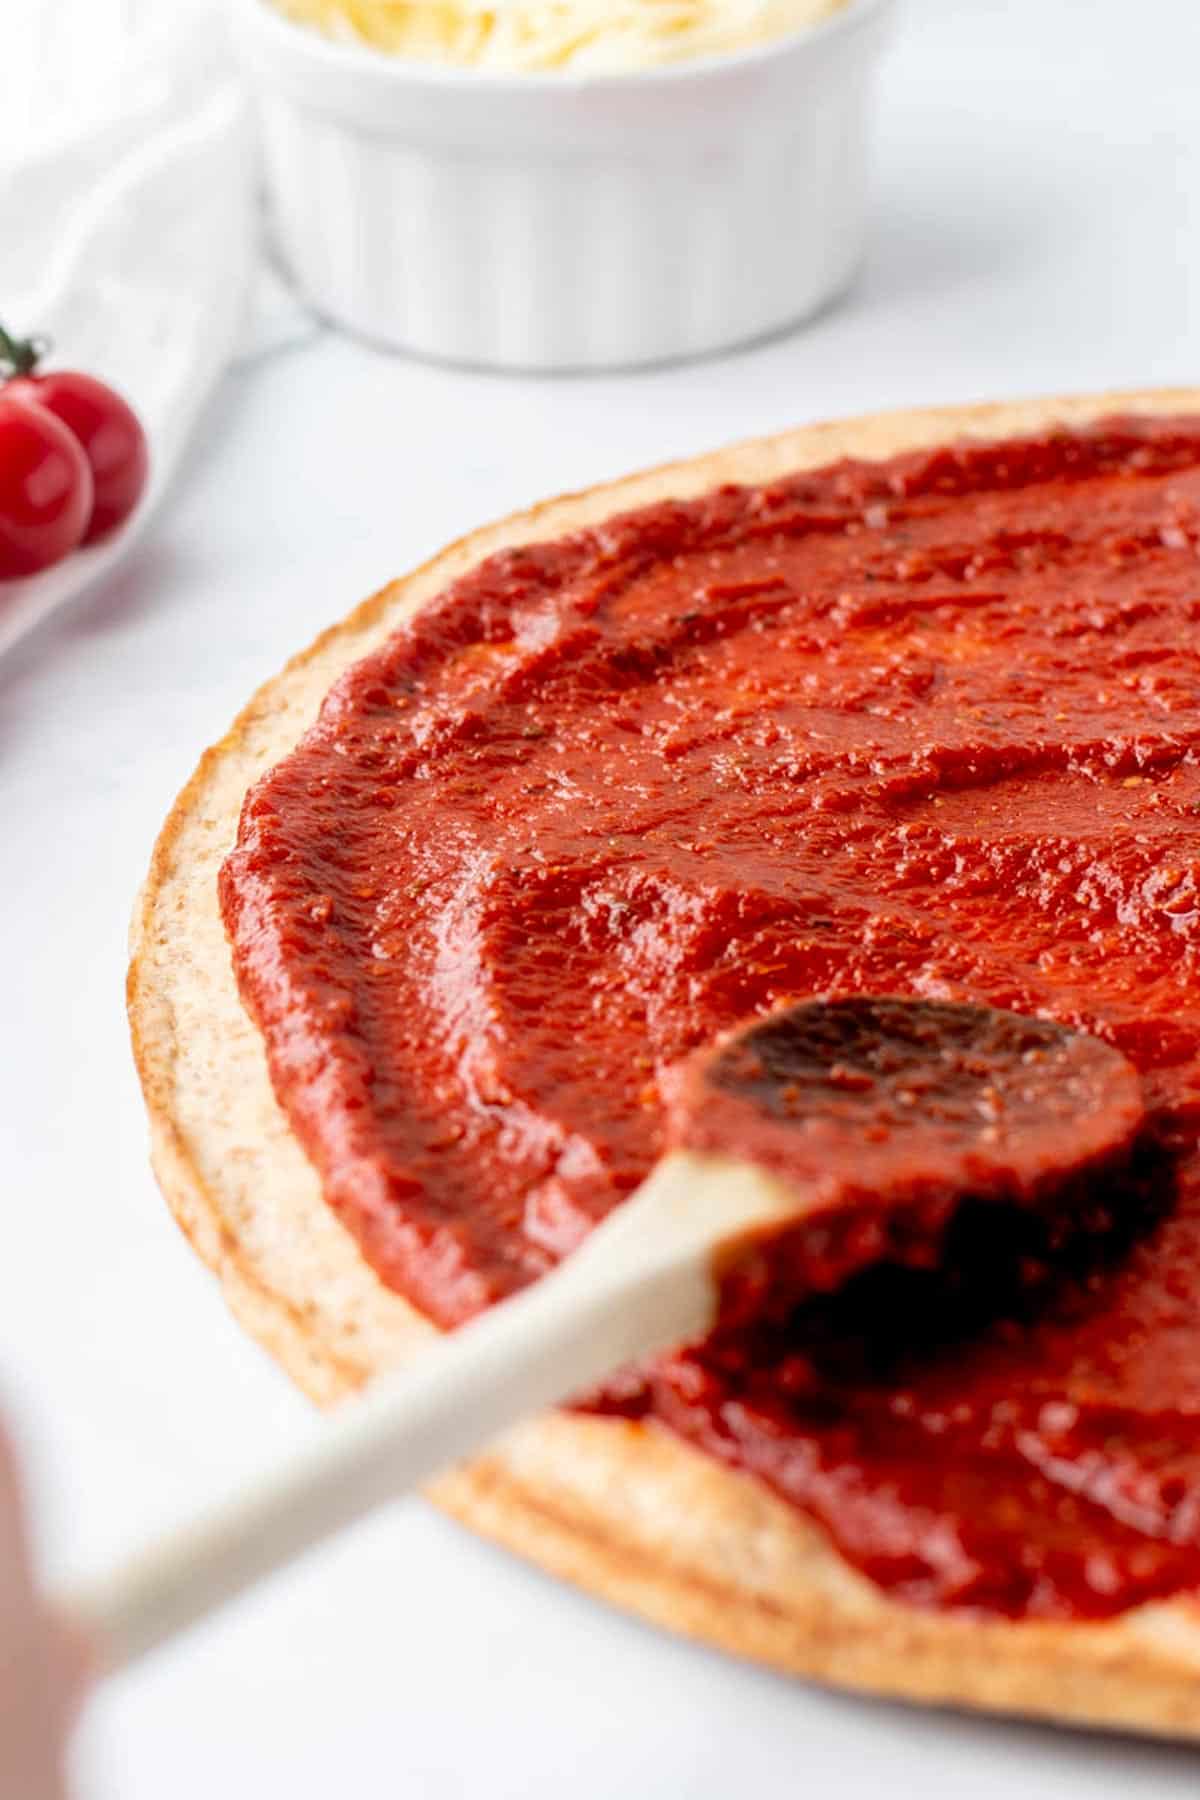 Healthy pizza sauce being spread on pizza crust with a wooden spoon.